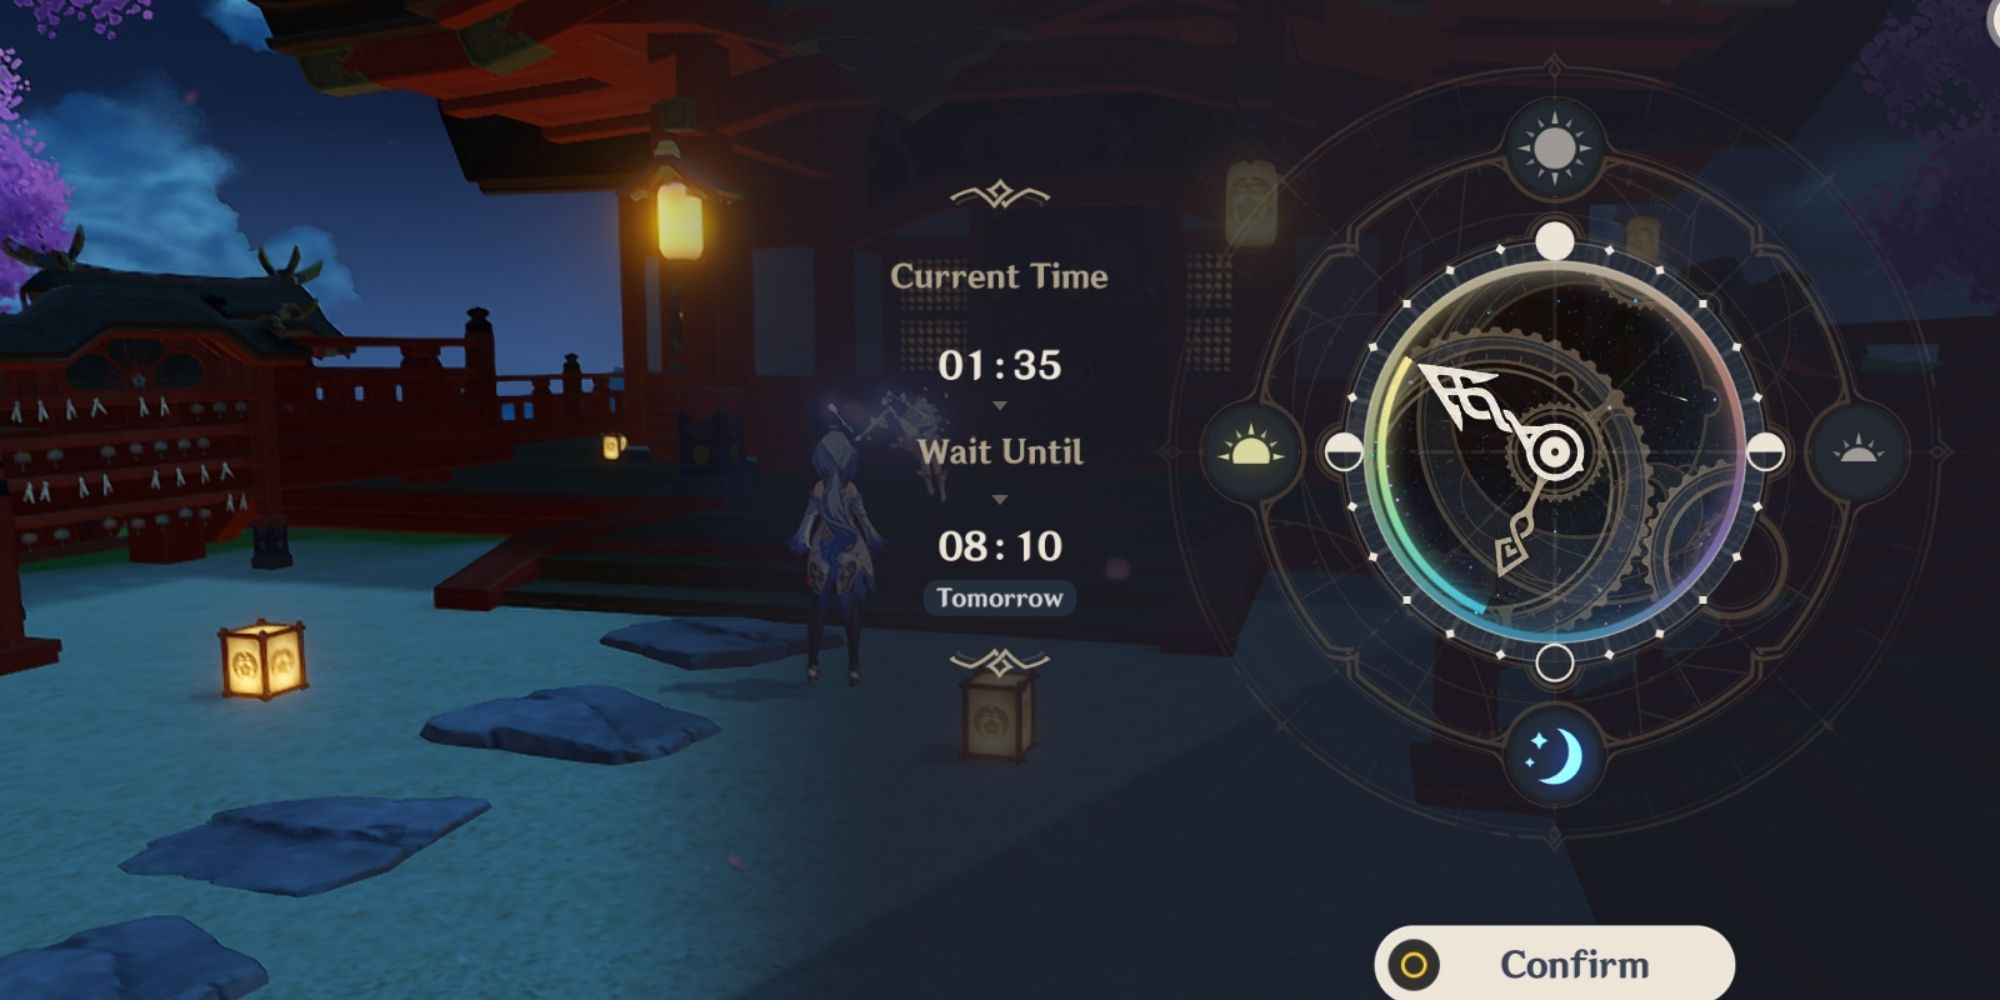 Moving the day forward using the clock feature